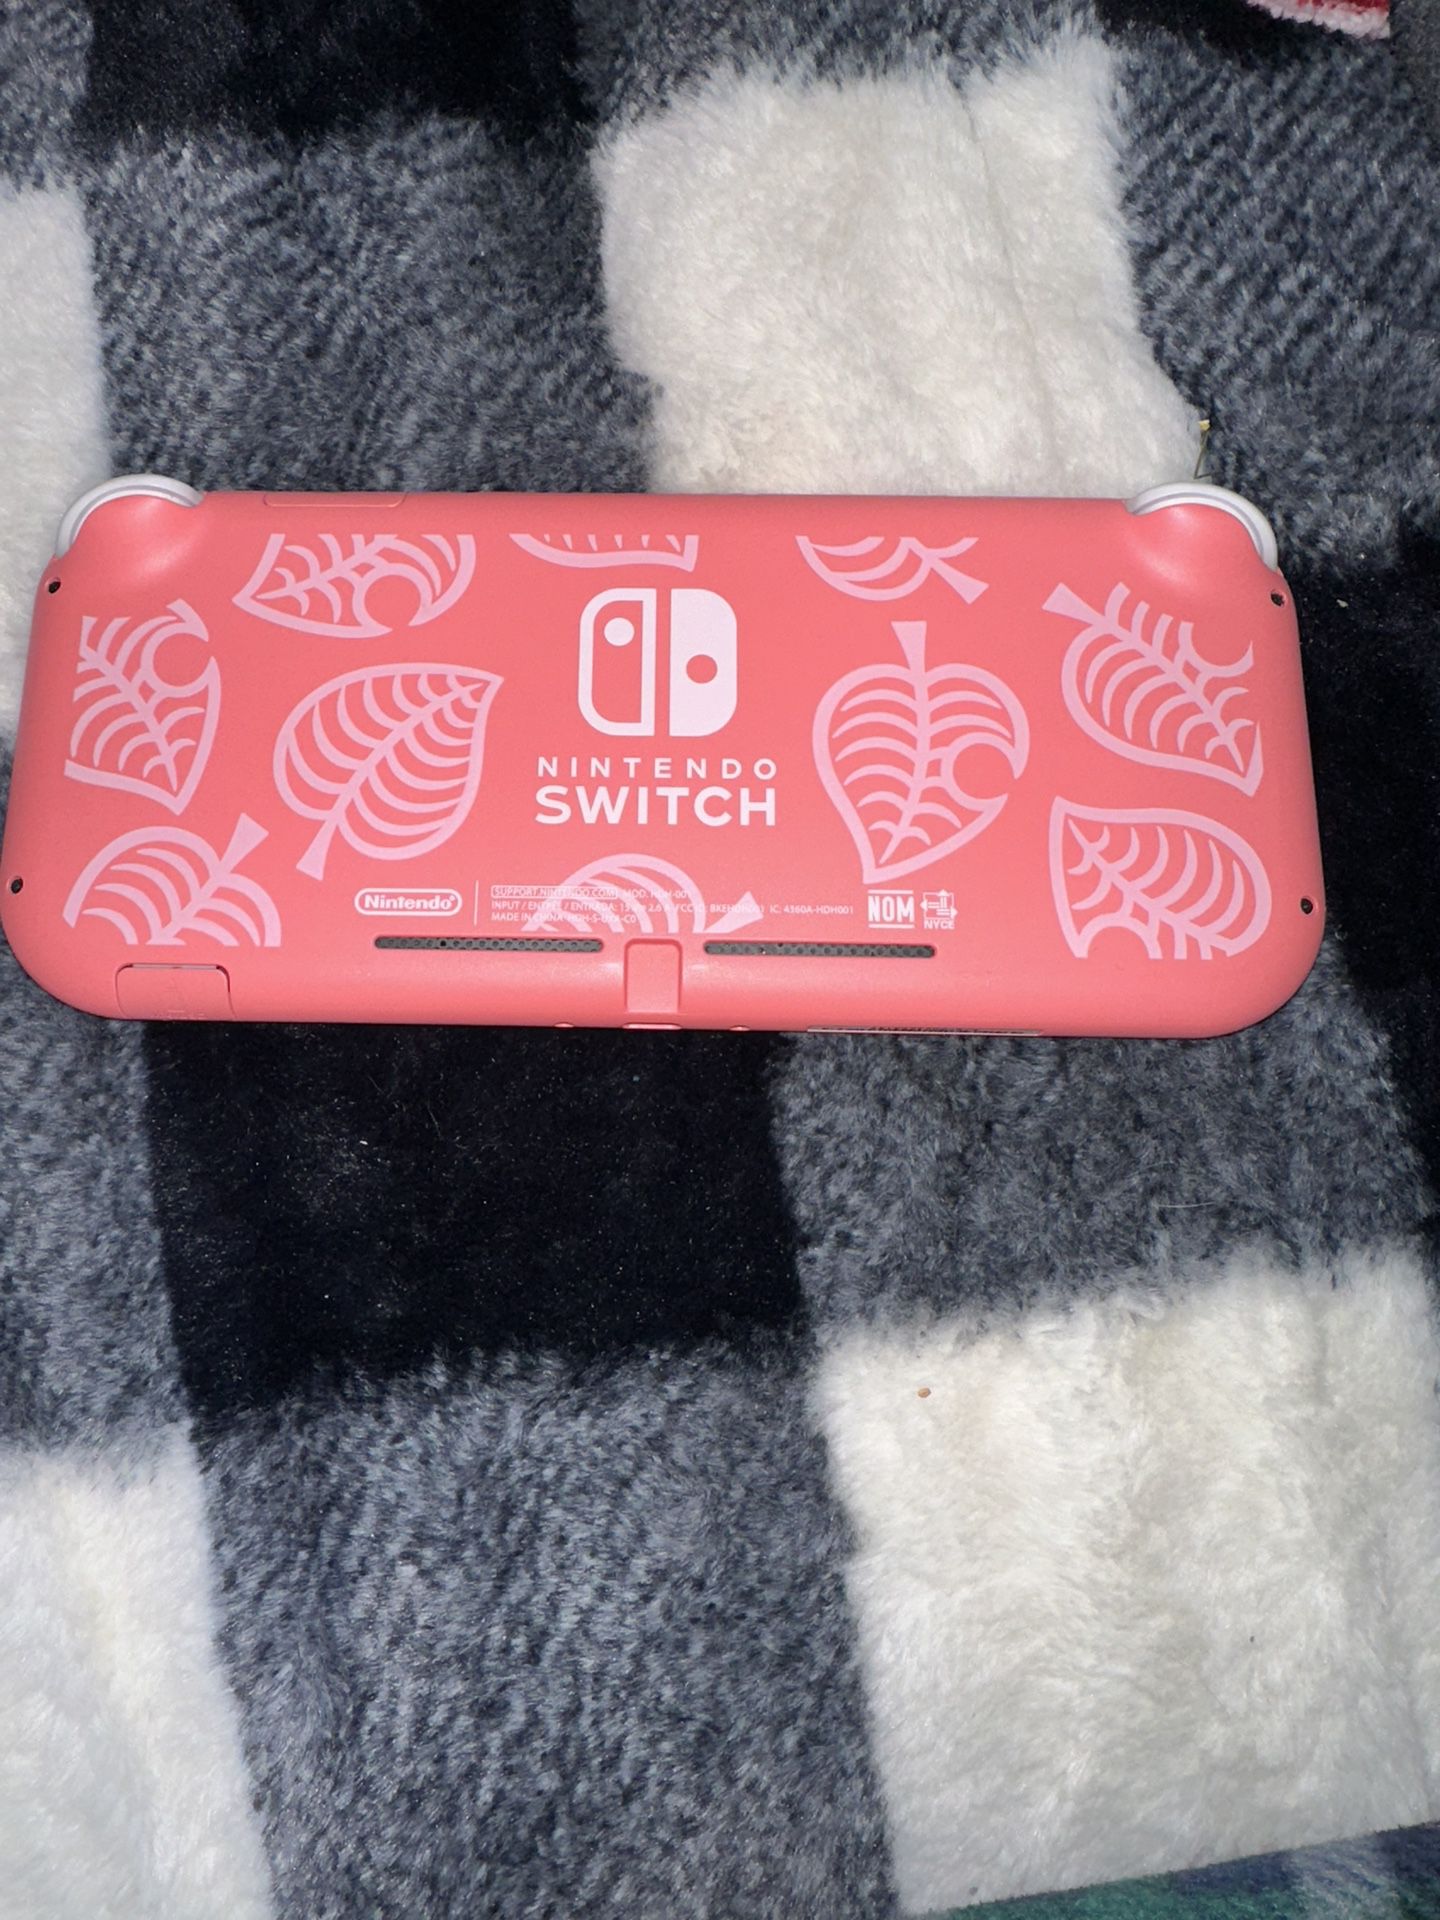 Nintendo switch light and animal crossing carrying case